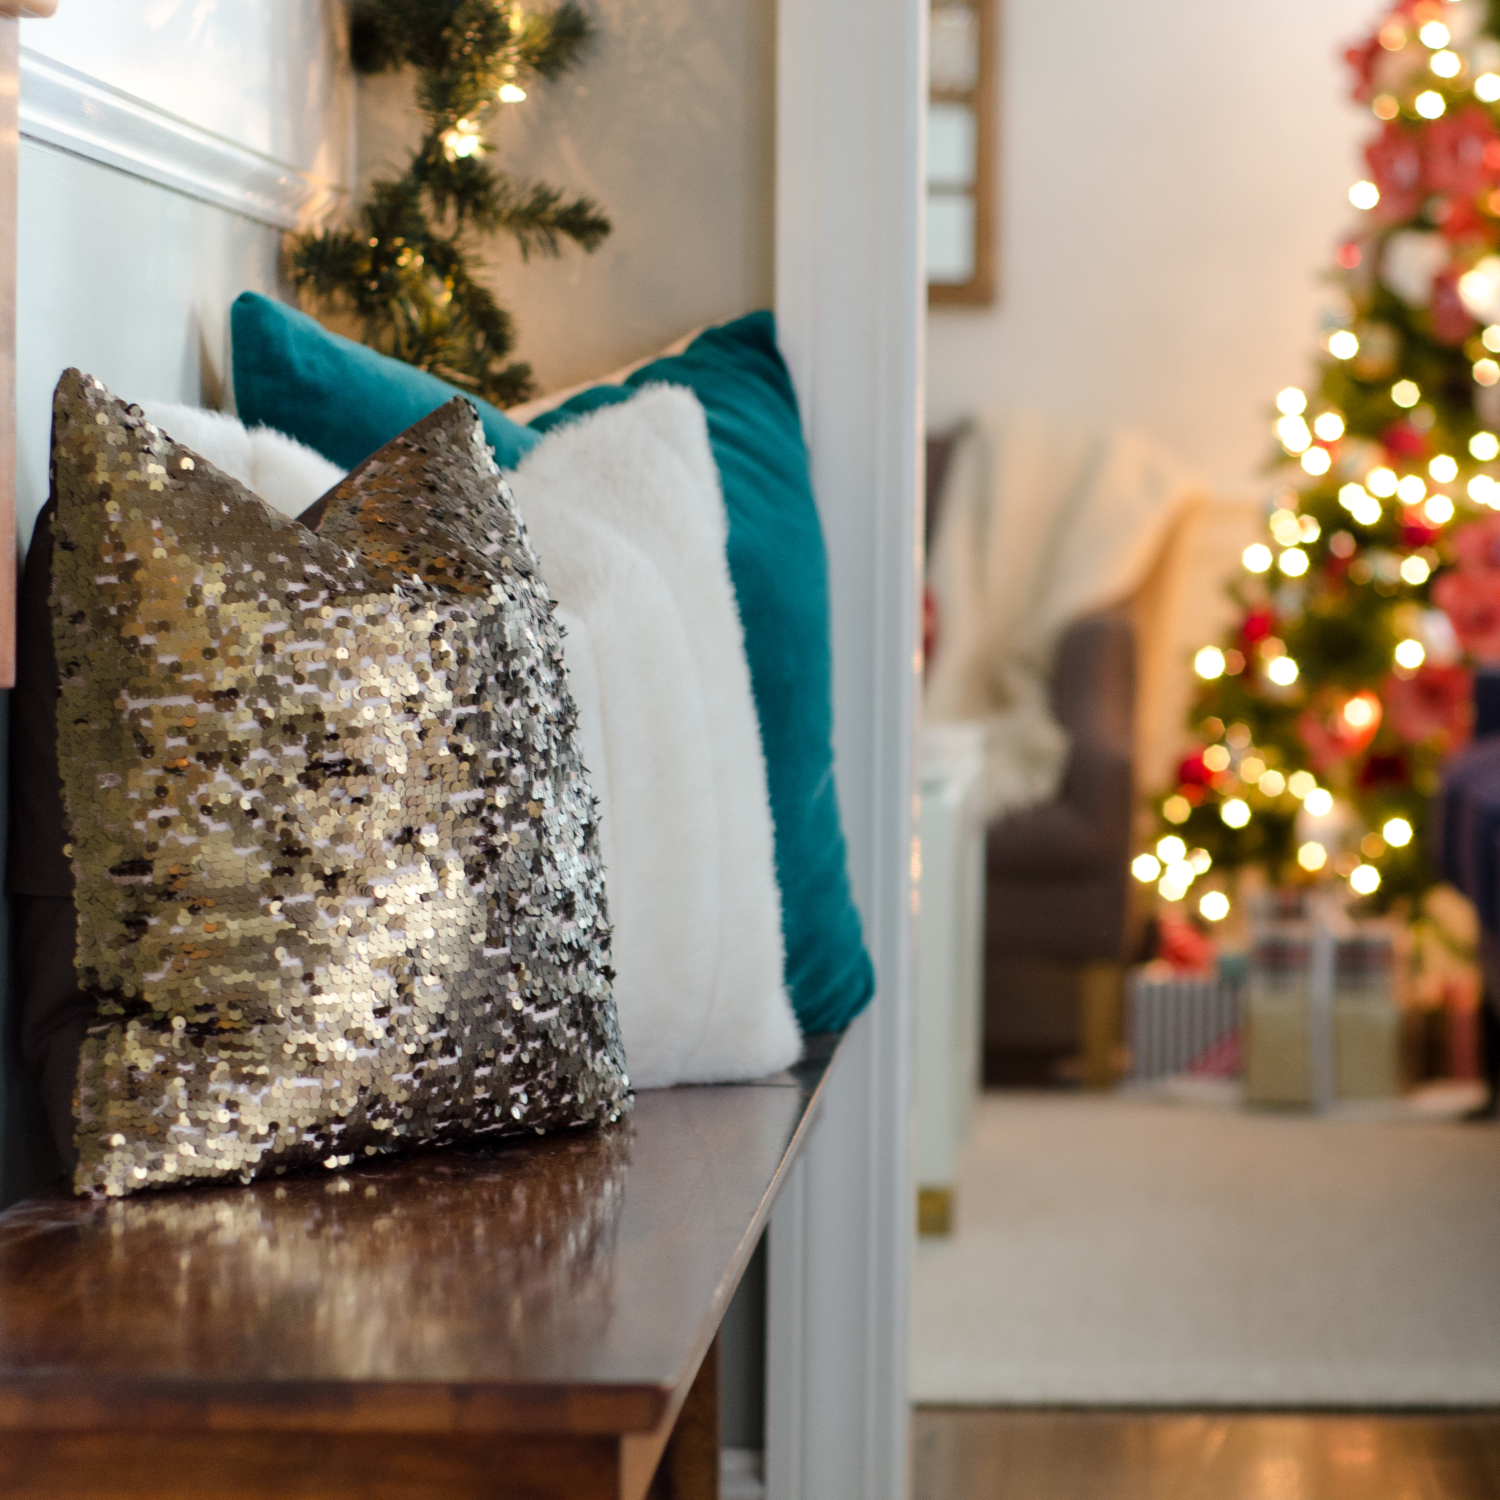 Classic Christmas entryway with greenery, twinkle lights, cable knit stockings, and more! So much inspiration!!